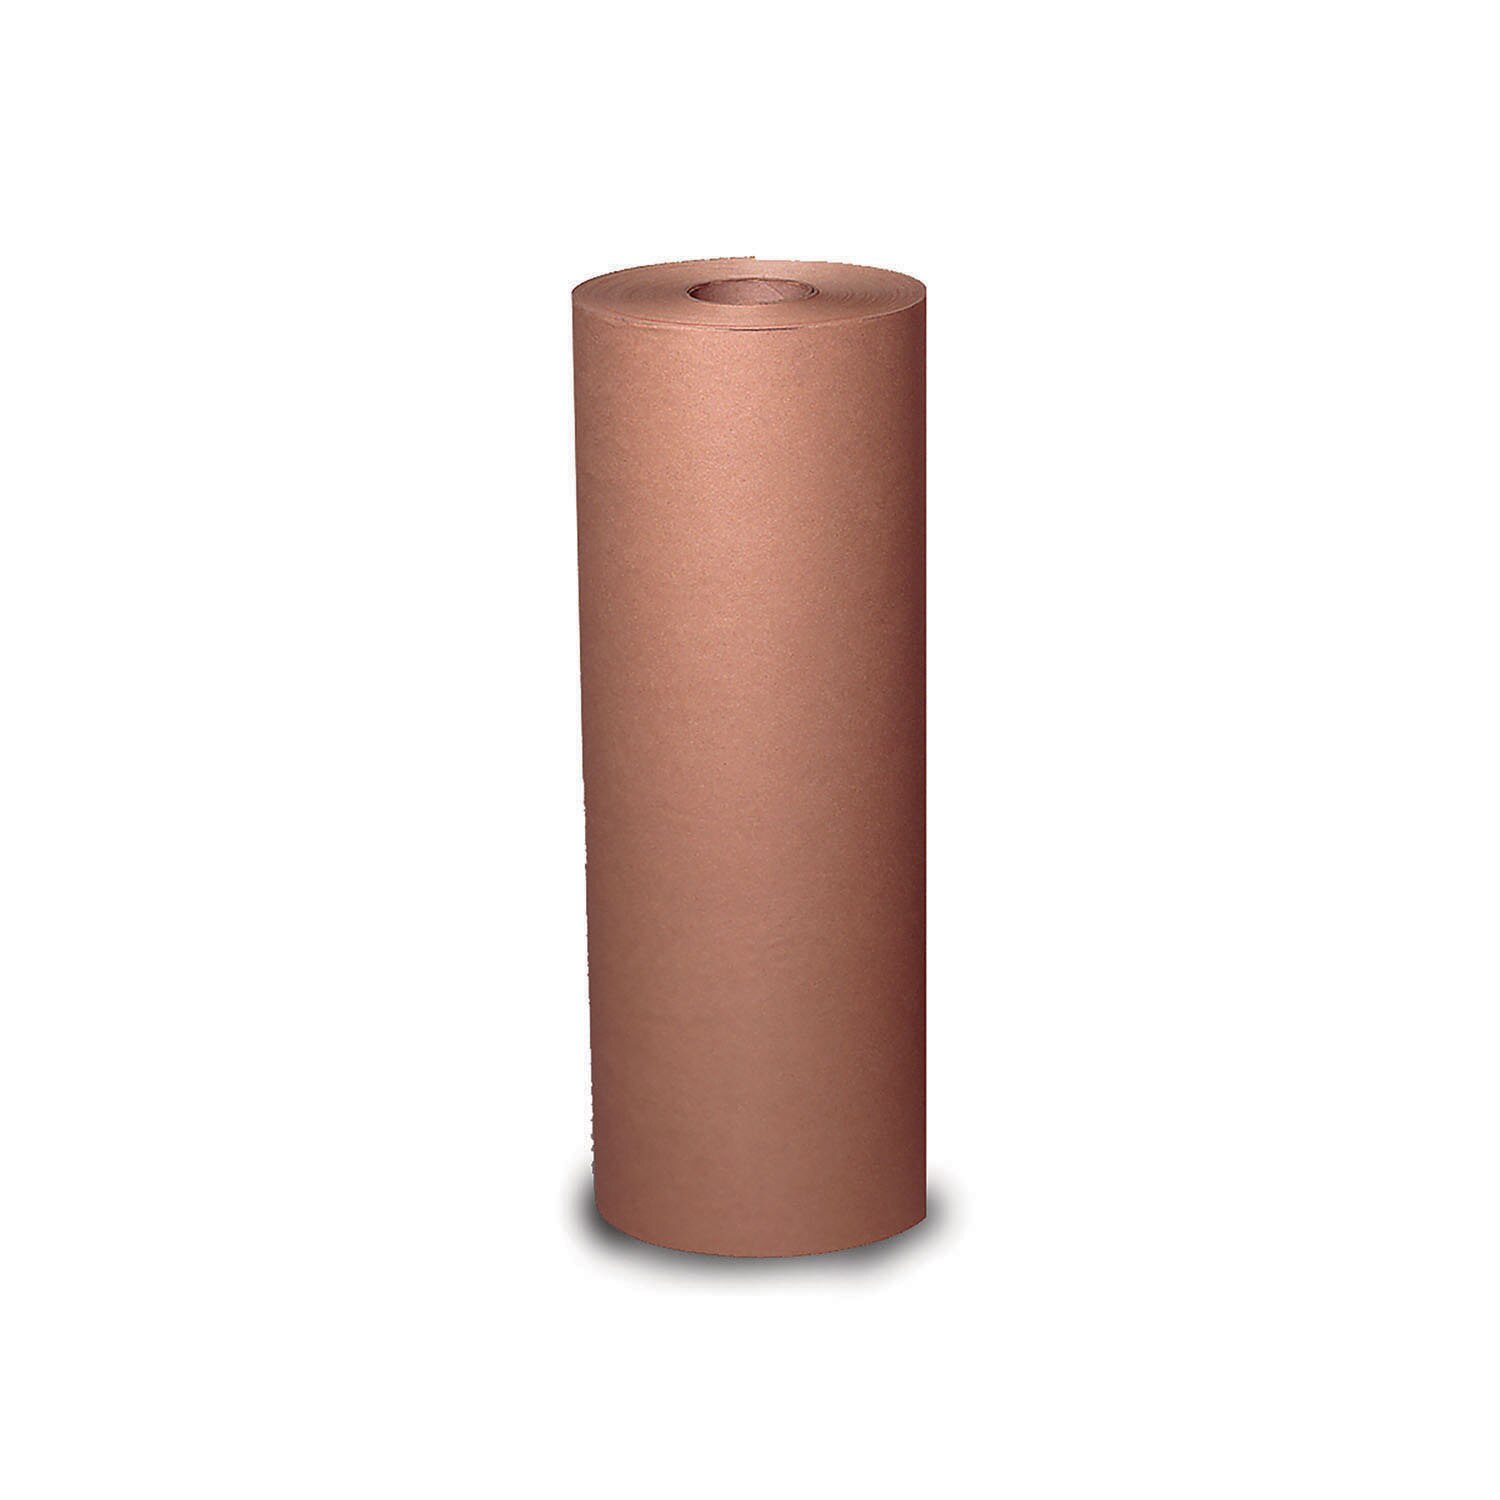 Kraft Wrapping Paper, Fire-Resistant, Recycled, 60 lb Basis Weight, 36" x 900', Brown